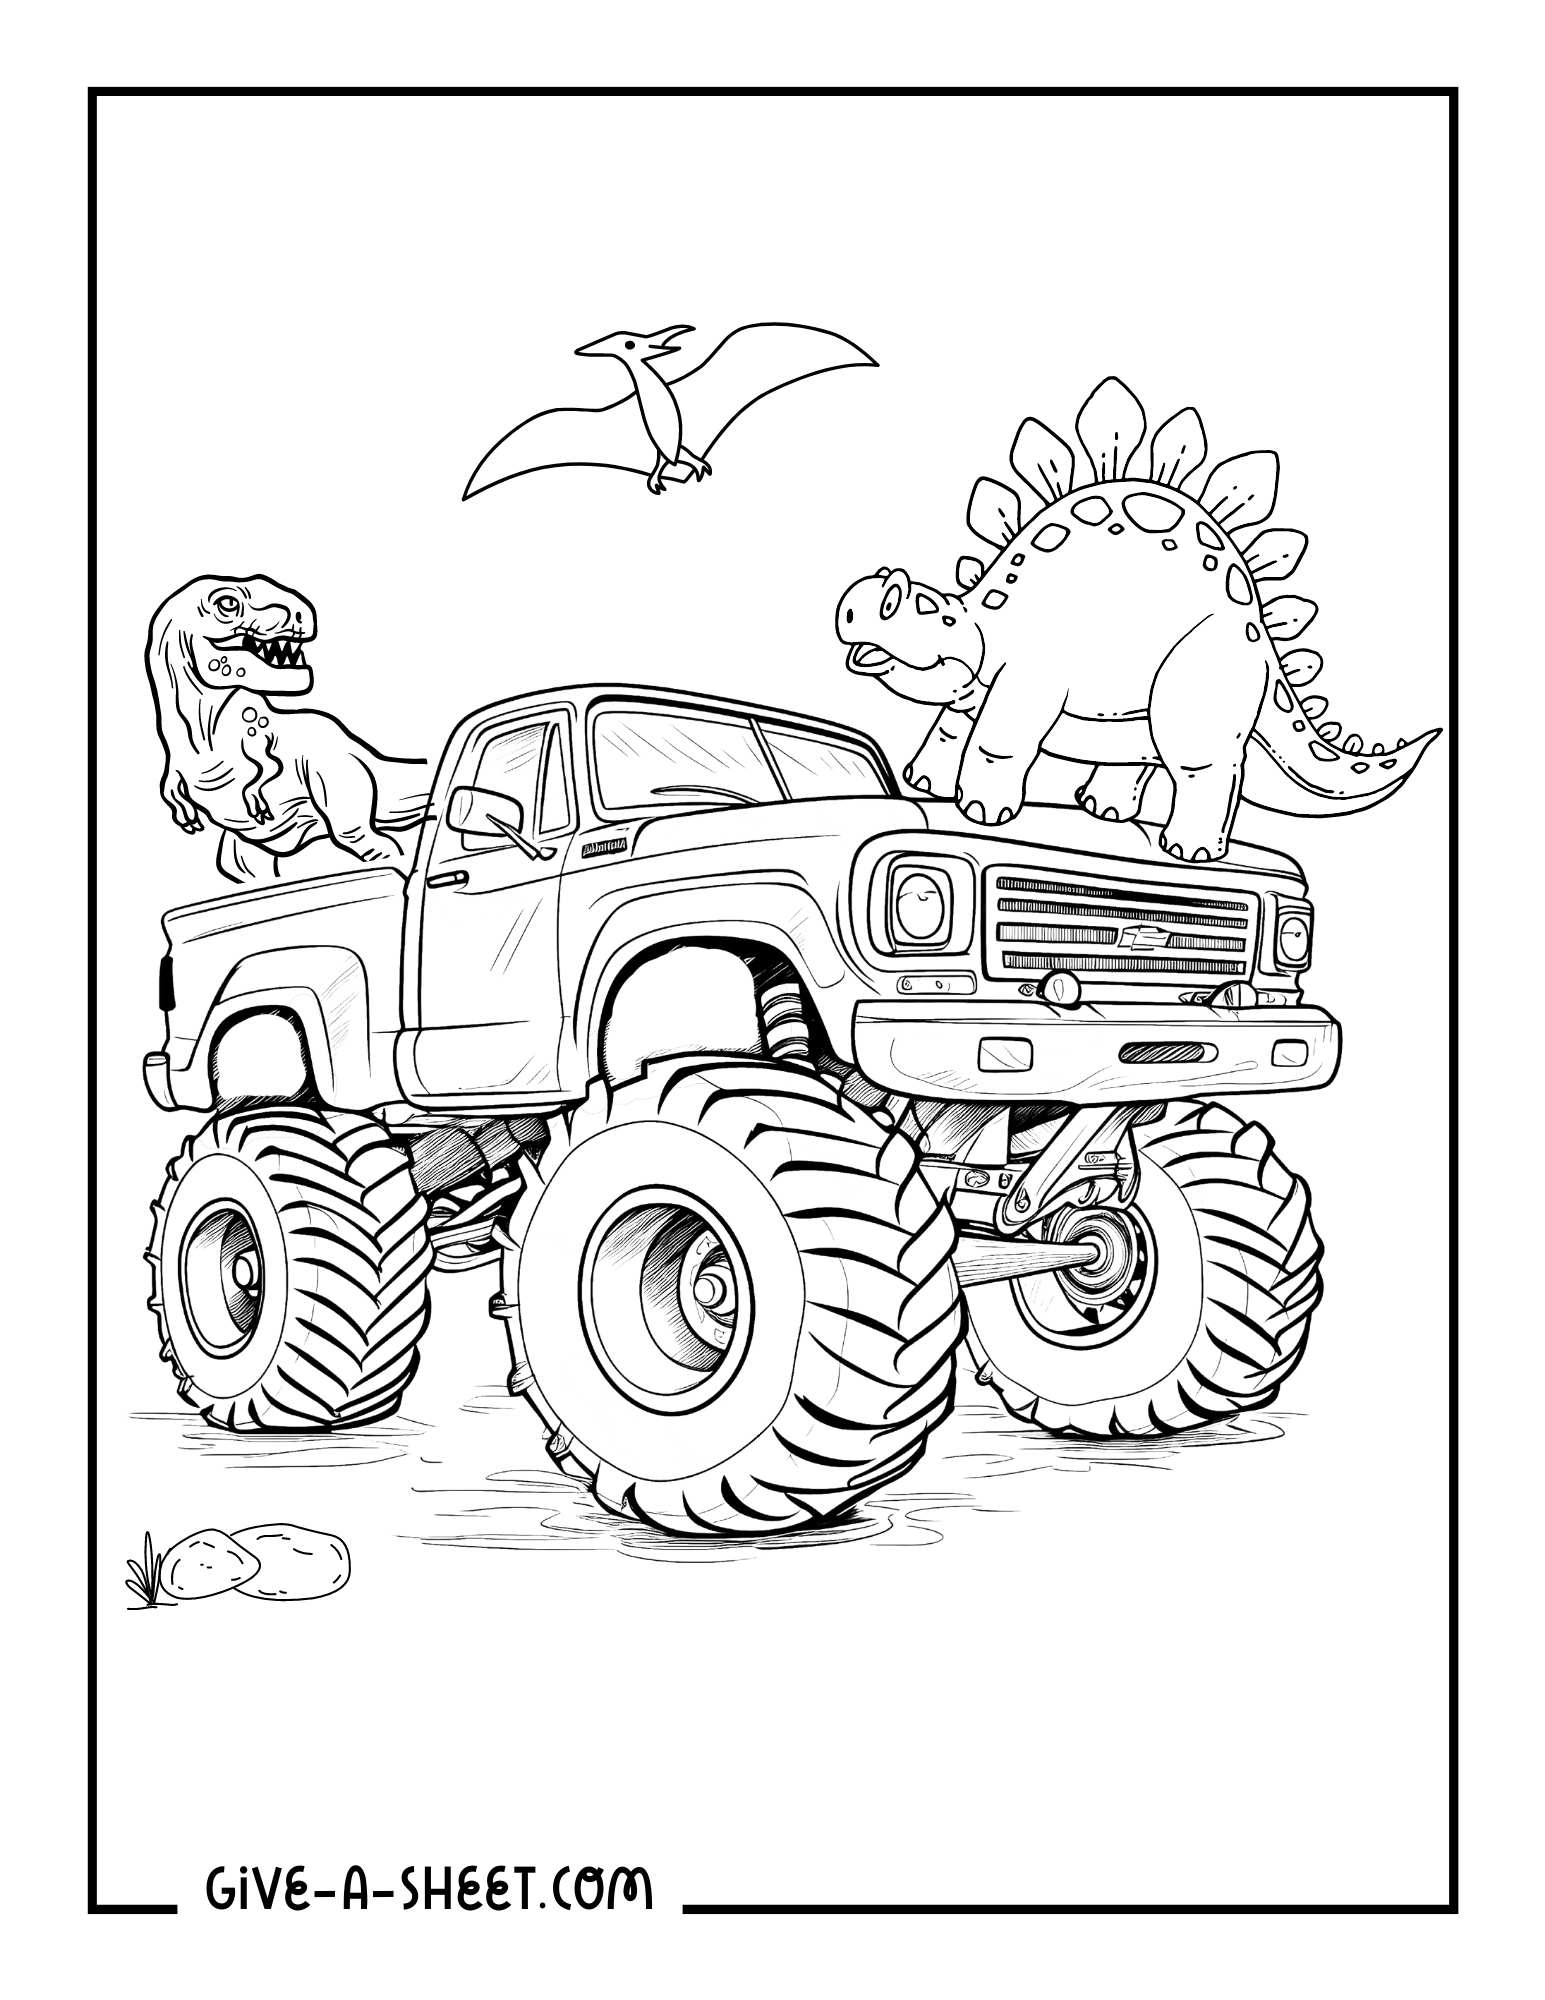 Monster truck racing coloring sheet for kids.